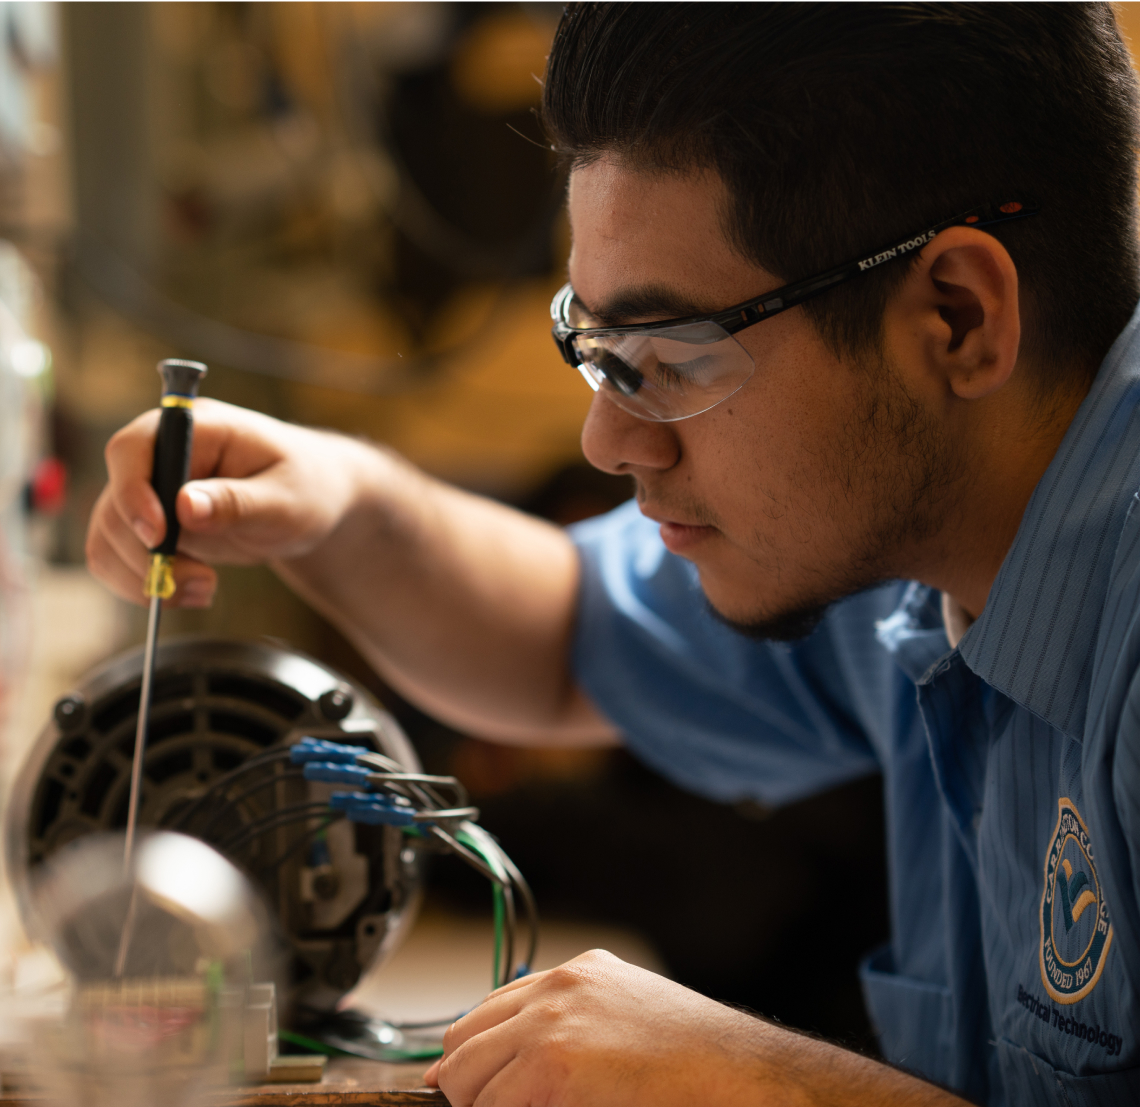 Carrington College trade student working on a mechanism